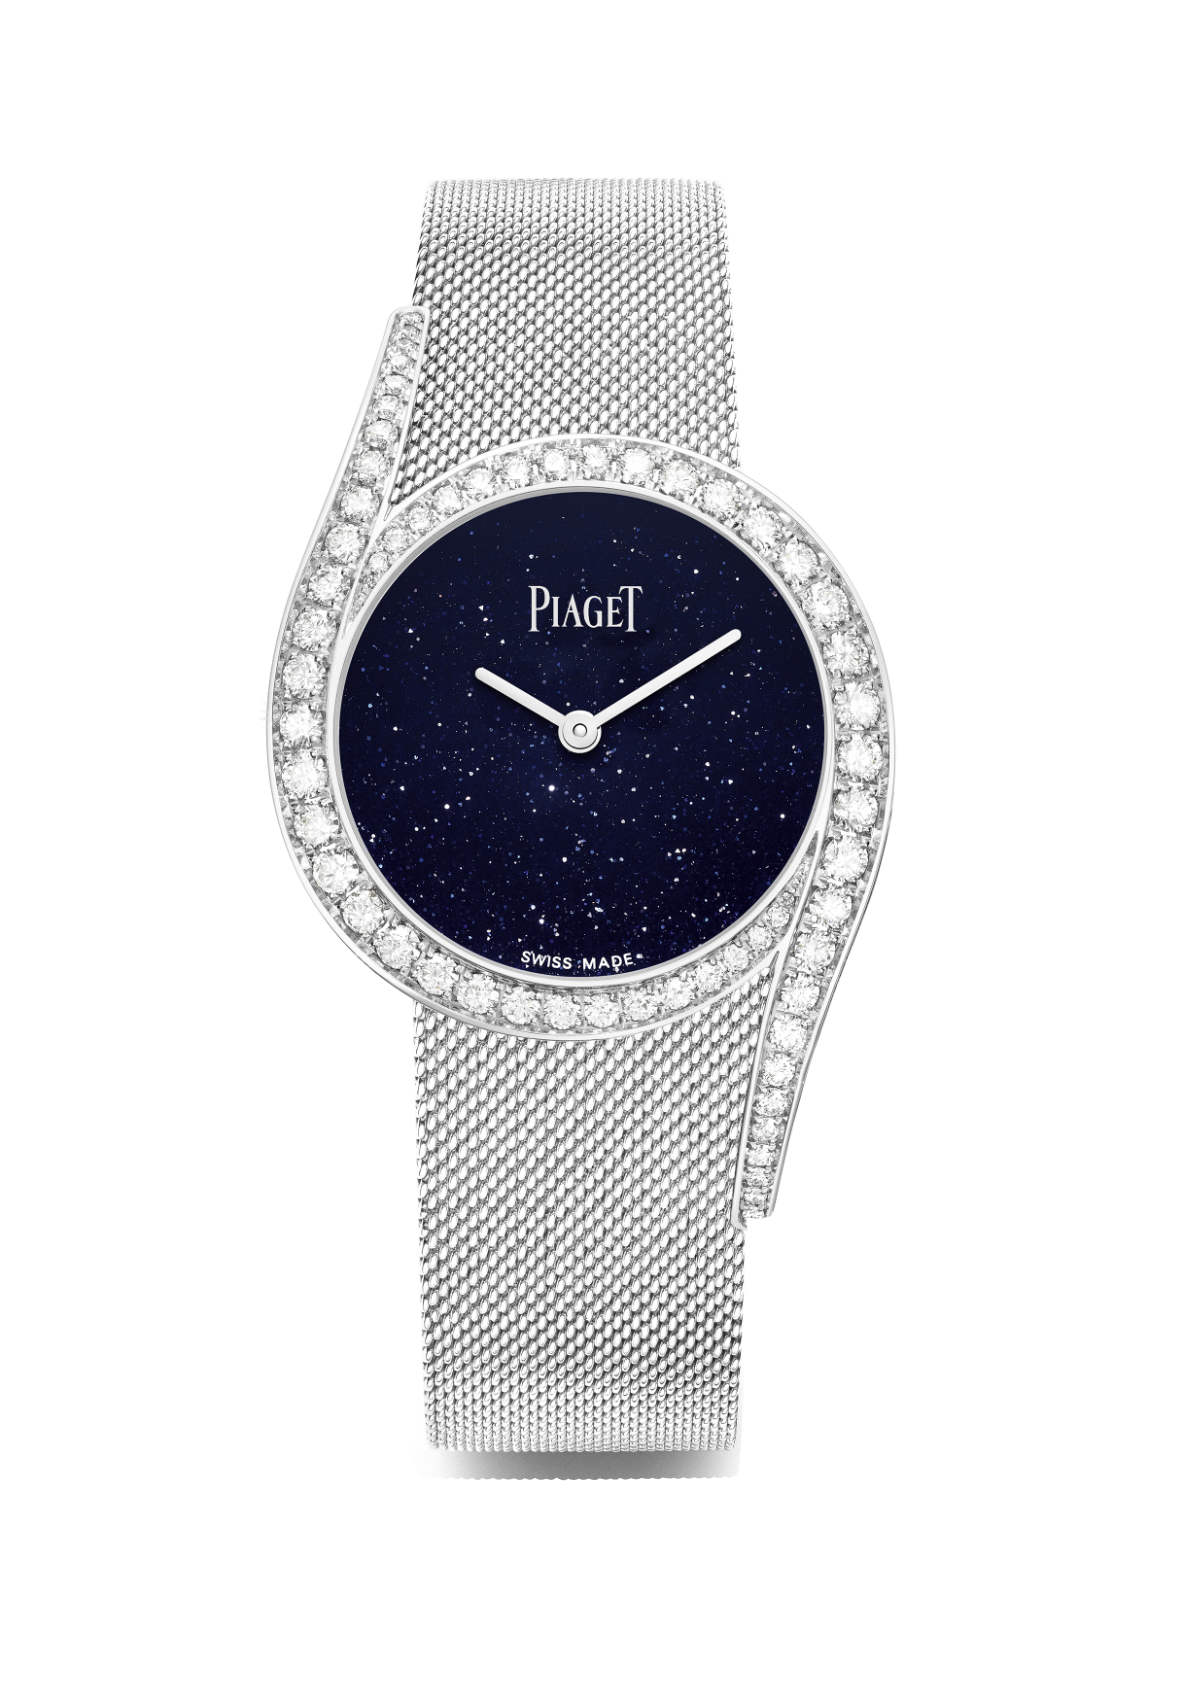 New Piaget Limelight Gala Aventurine: The Sparkle Of Extravagance